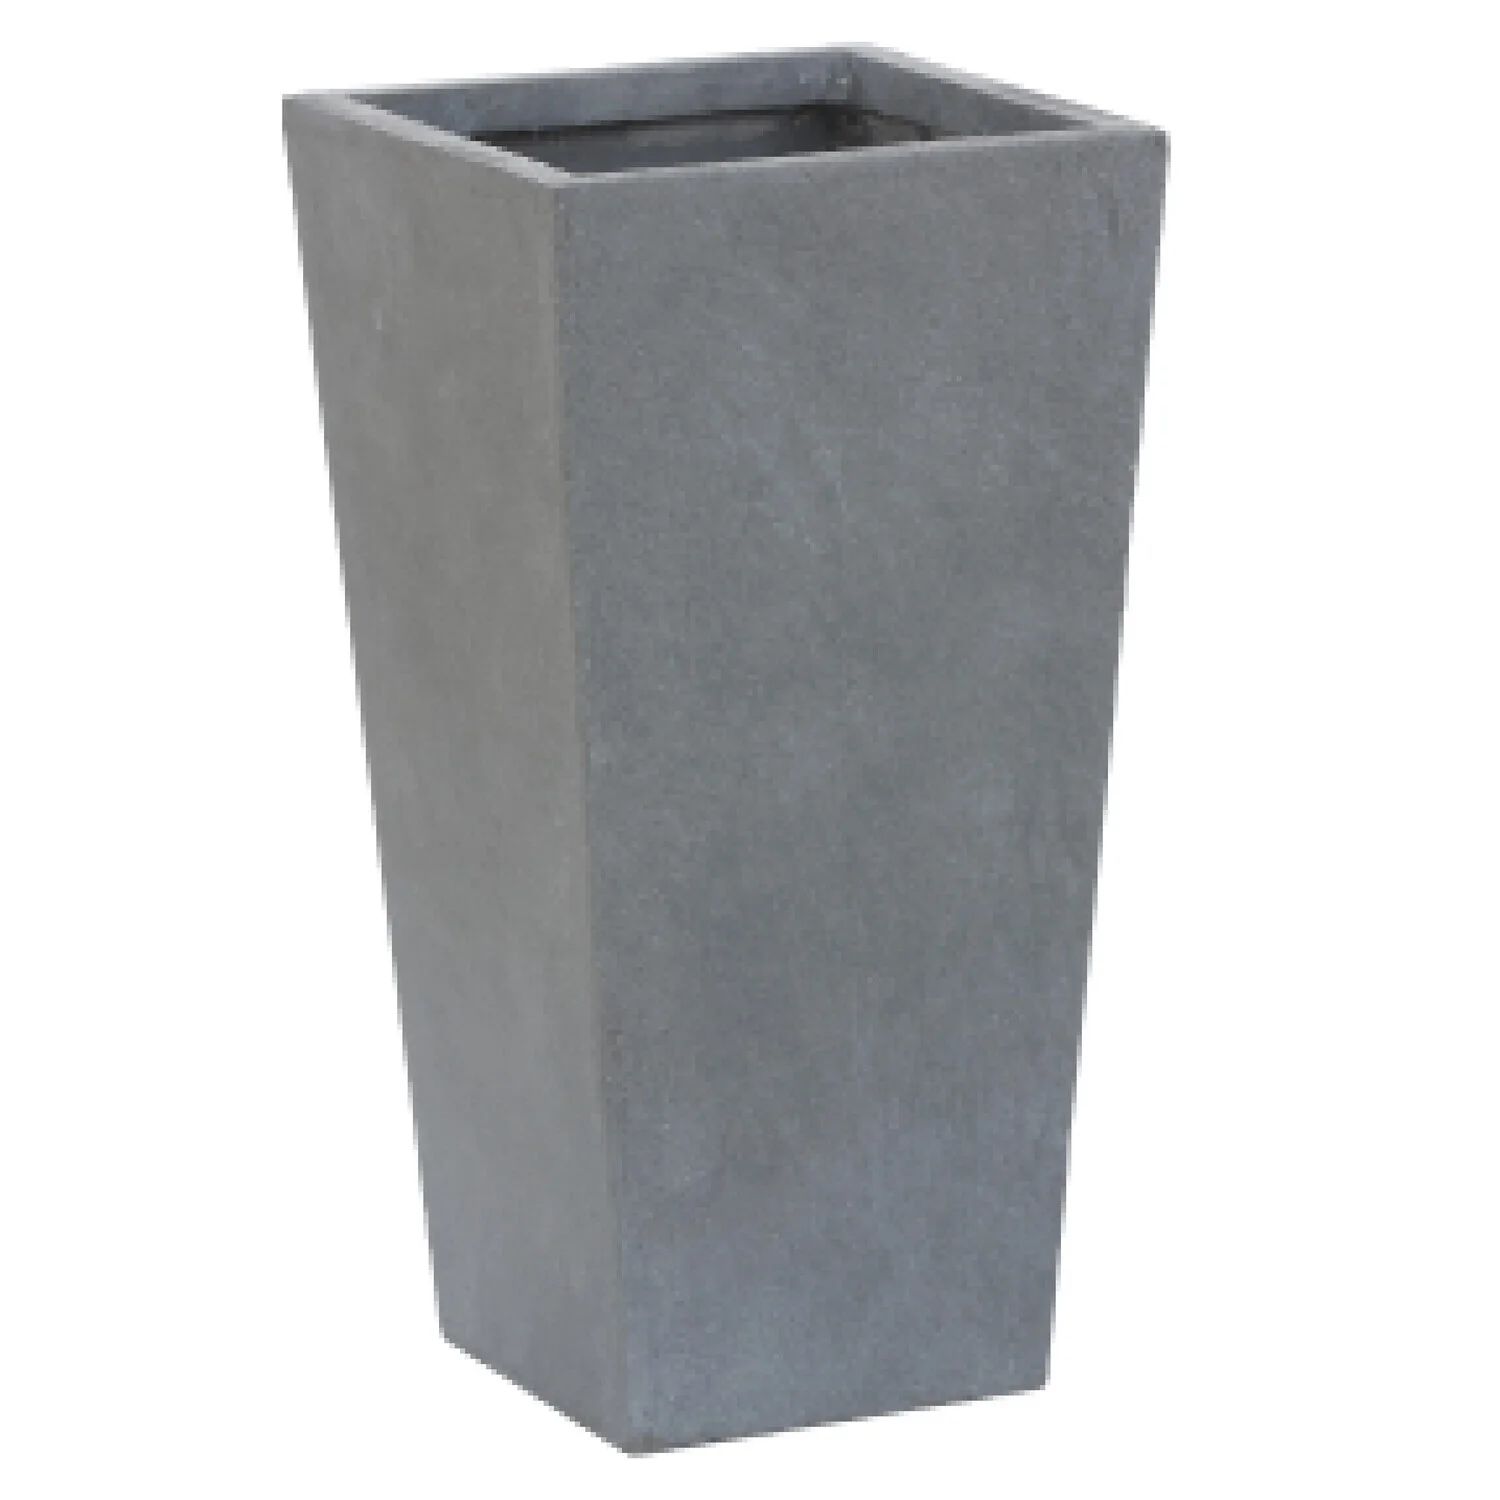 HomeStock Southwestern Style Light Gray Mgo 24.2In. H Tall Tapered Square Planter | Walmart (US)